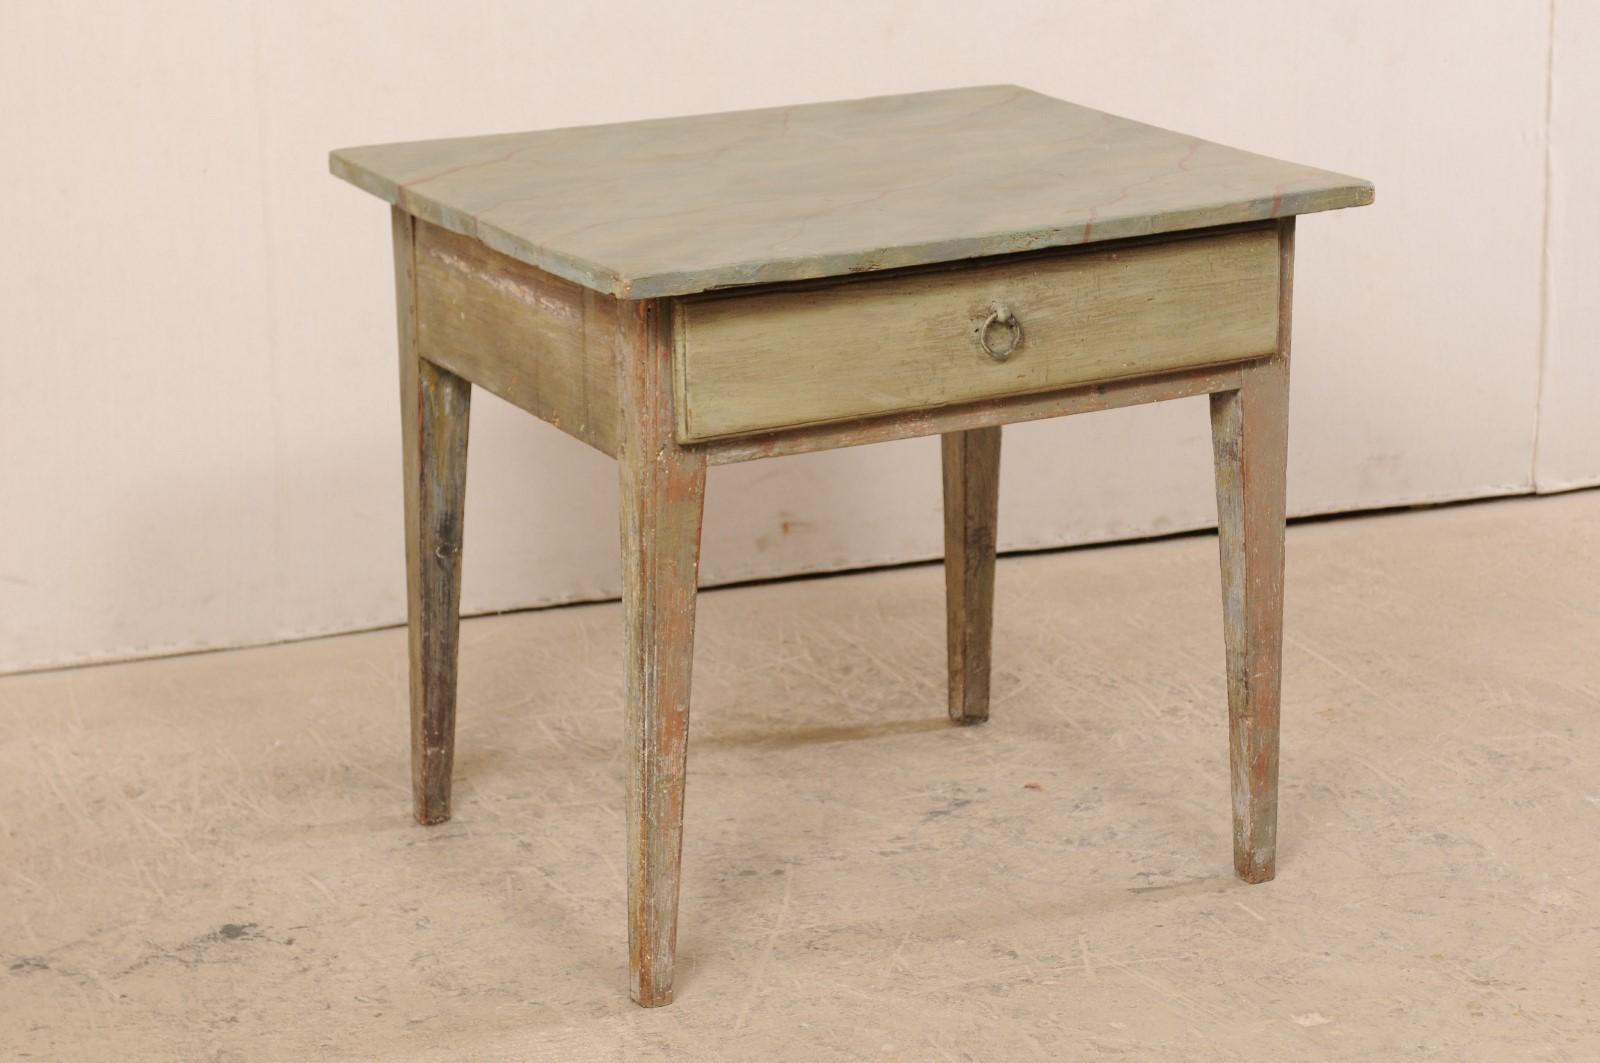 A Swedish painted wood table with faux-marble top from the 19th century. This antique Gustavian table from Sweden features a hand painted faux-marble top, which slightly overhangs a plain apron that houses a single drawer at one side. The table is